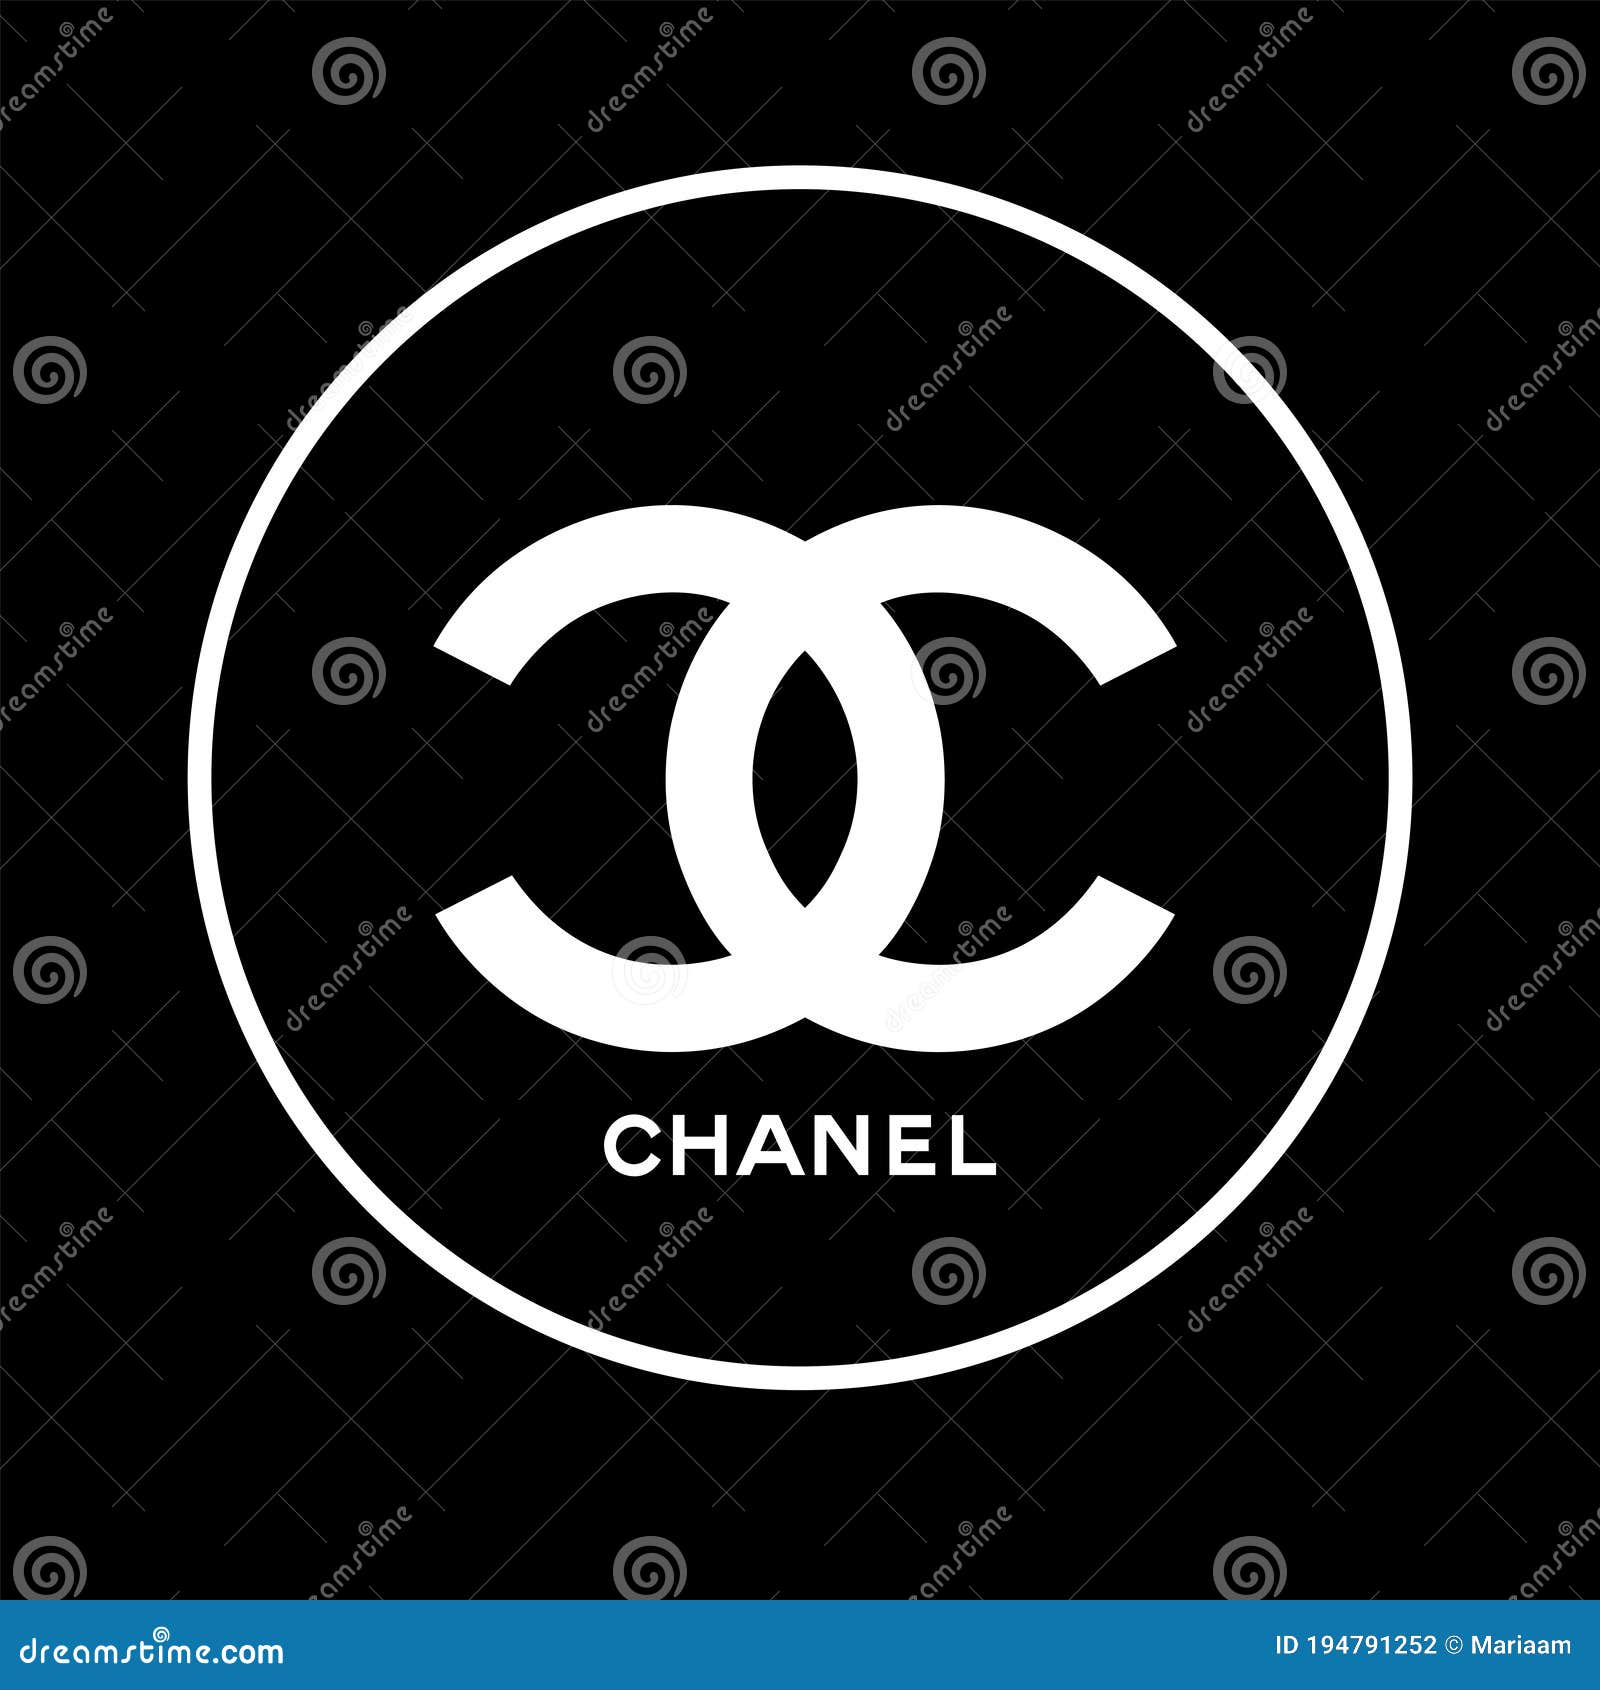 Coco Chanel. the Popular Chanel Logo White Over Black Background. Editorial Photography - jewelry, coco: 194791252